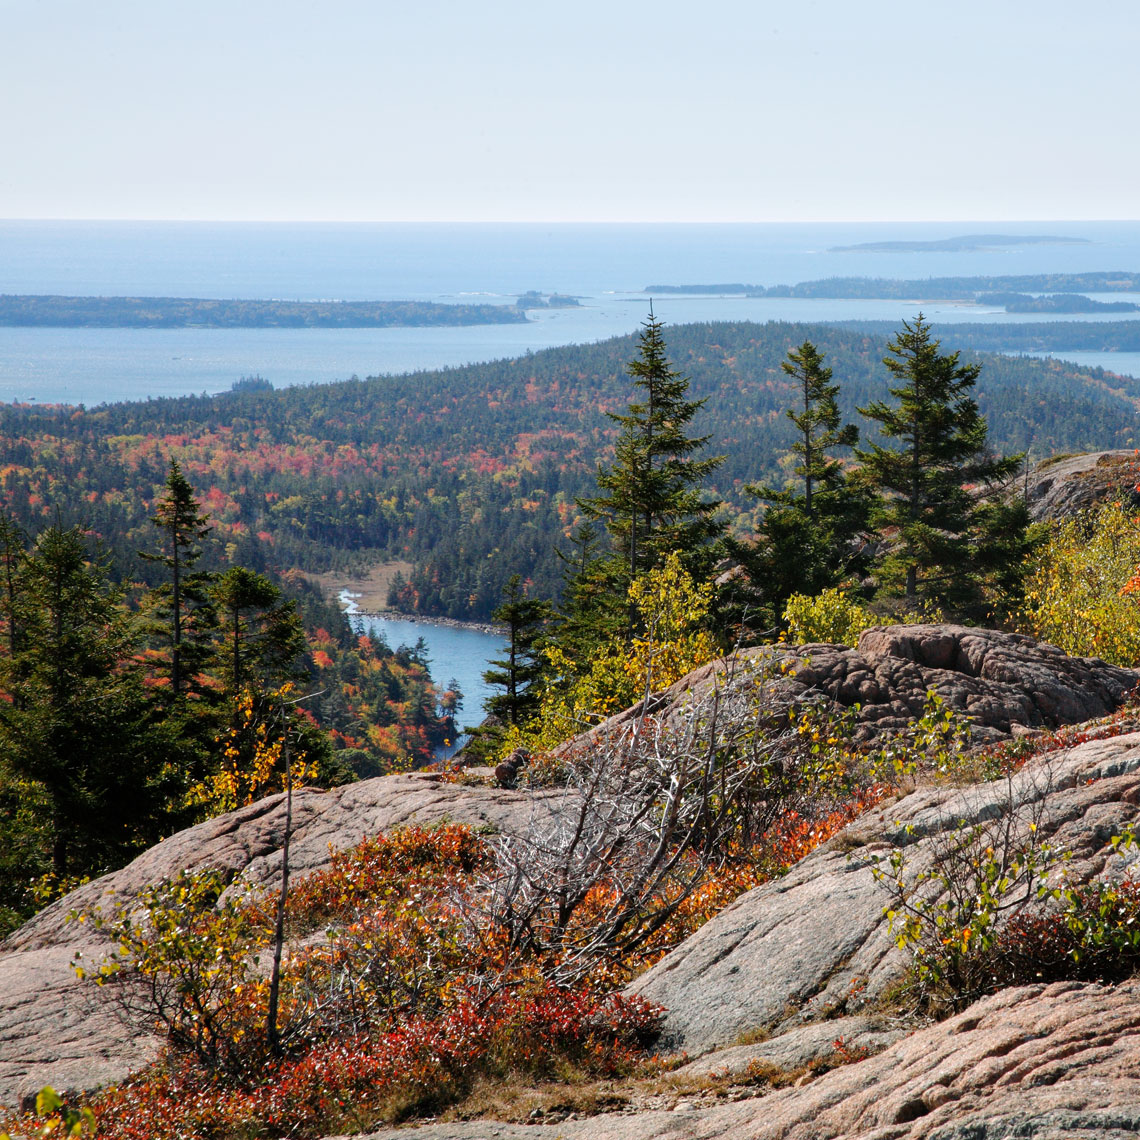 acadia national park views in the autumn